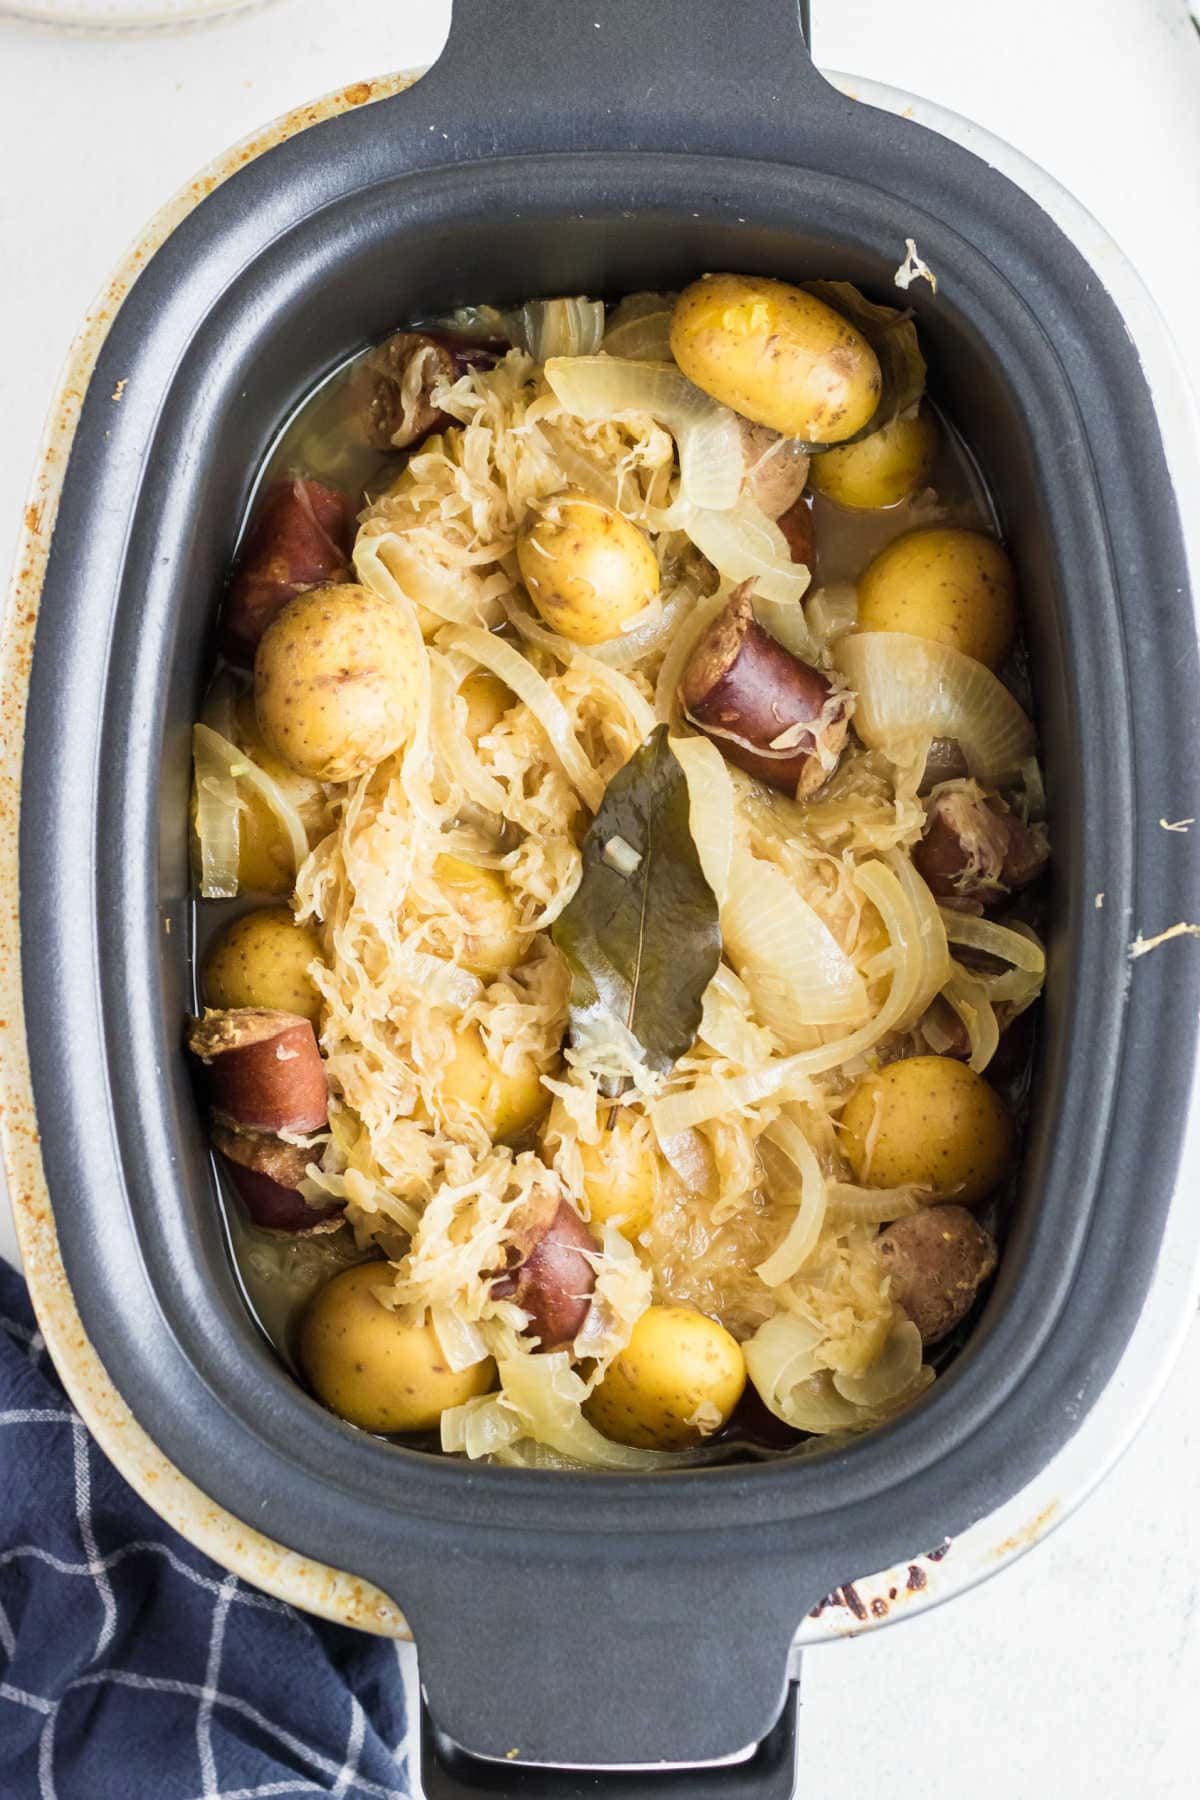 A crockpot filled with sliced kielbasa, potatoes, onions, and sauerkraut. A bay leaf rests on top.